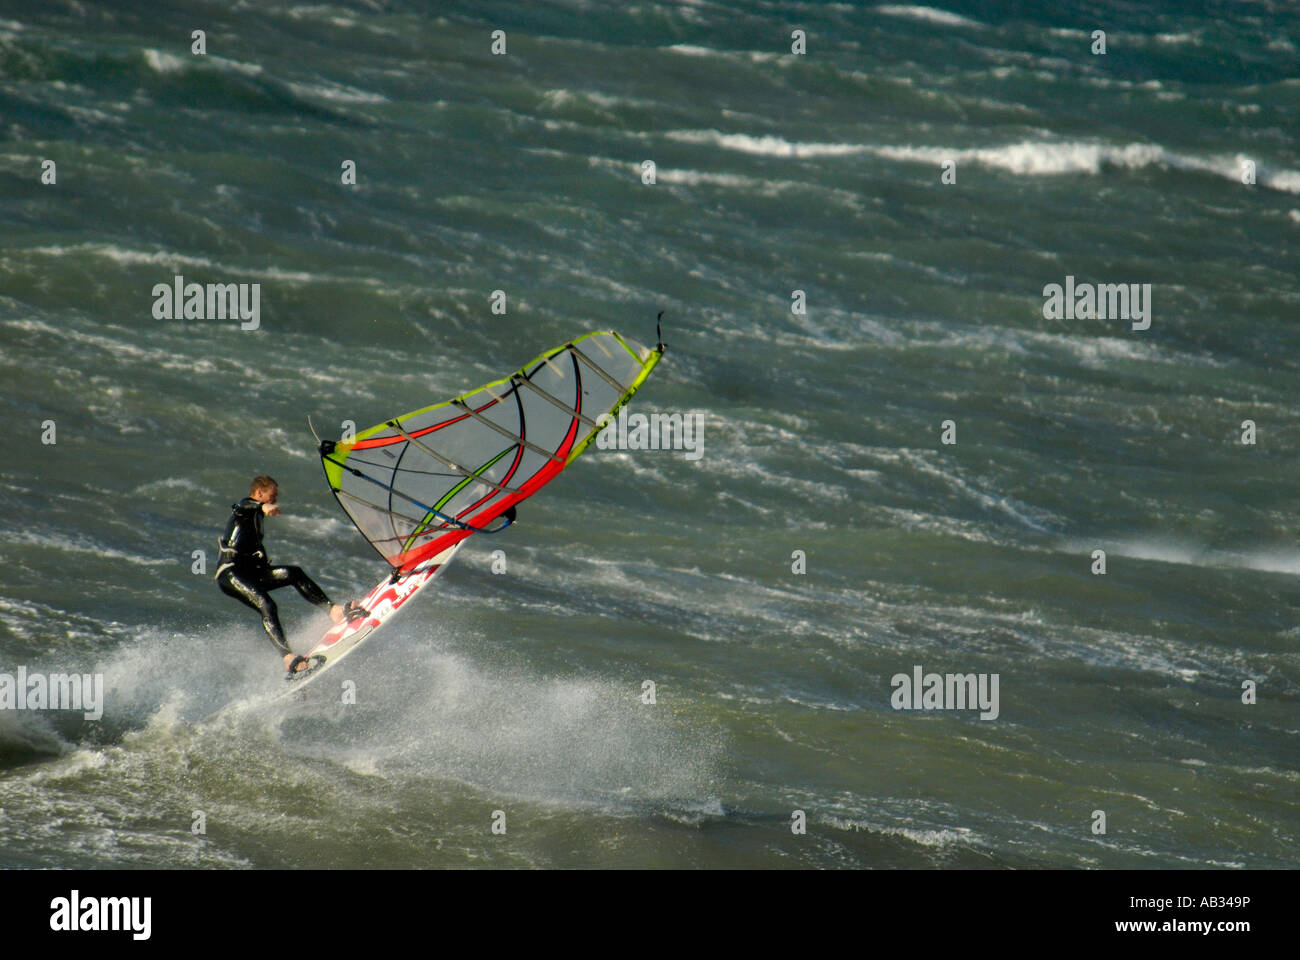 Man windsurfing in strong winds, France, Marseille. Stock Photo